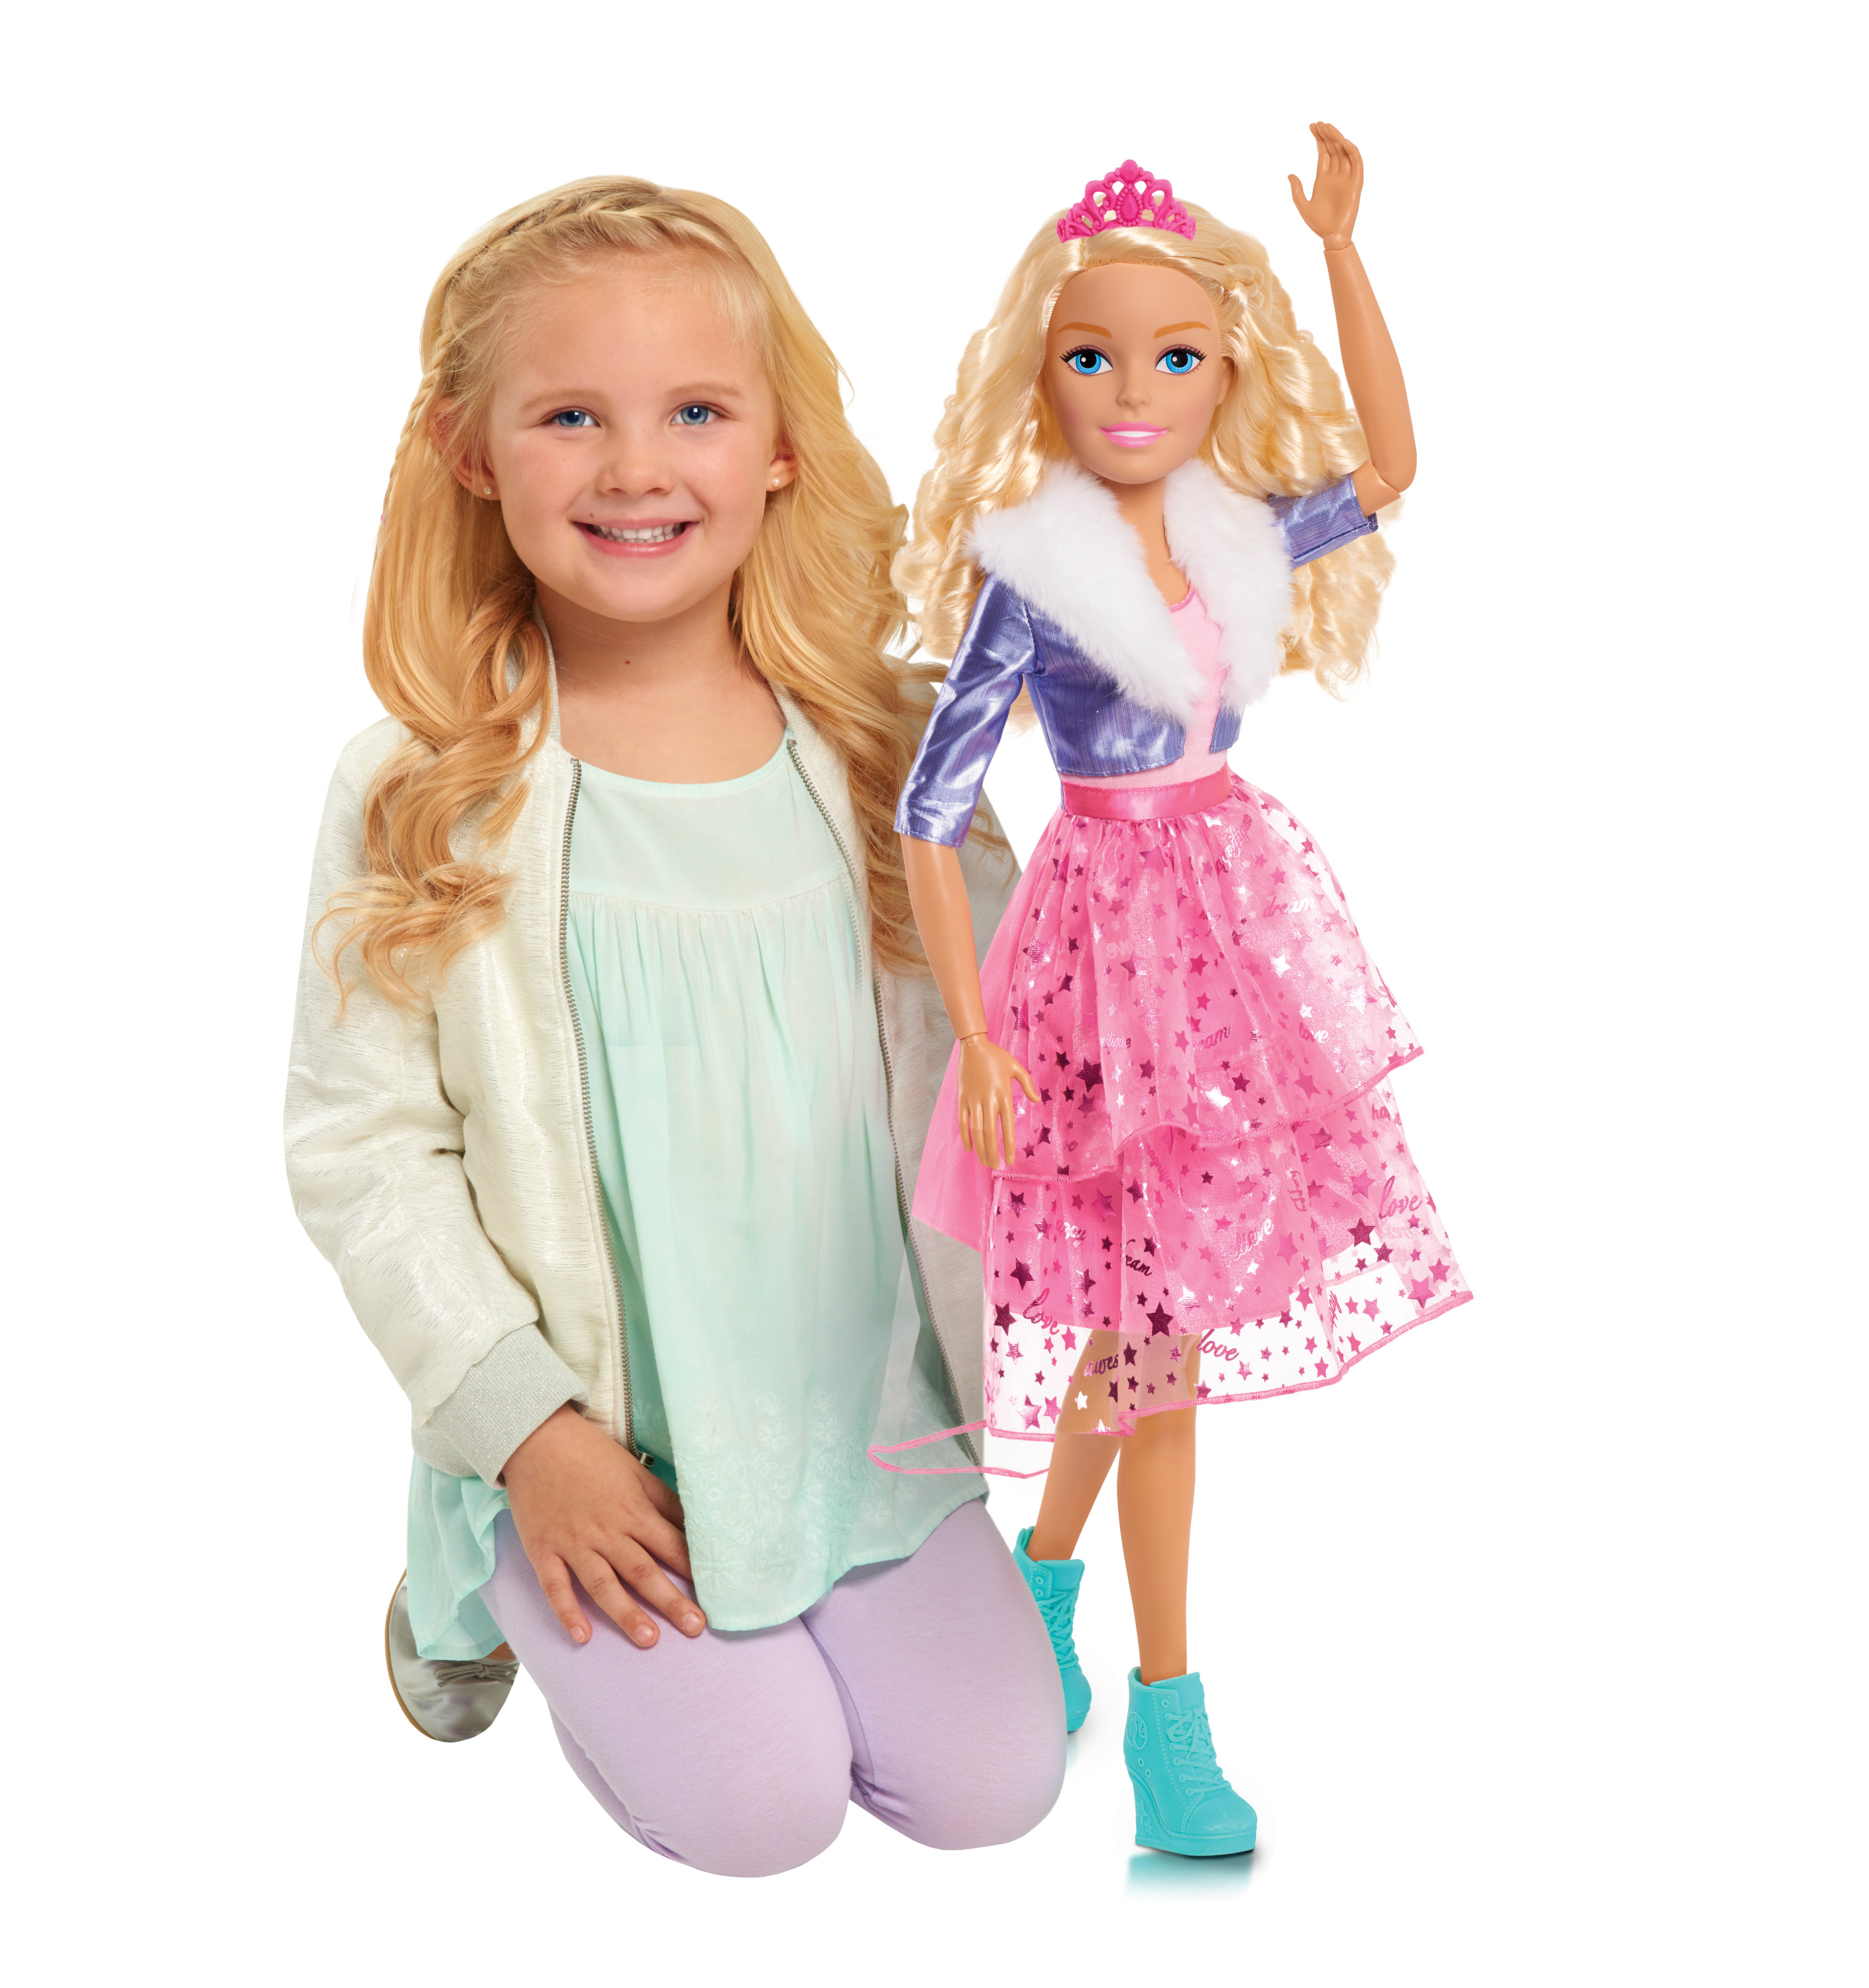 Barbie 28-inch Best Fashion Friend Princess Adventure Doll, Blonde Hair,  Kids Toys for Ages 3 Up, Gifts and Presents - image 1 of 2